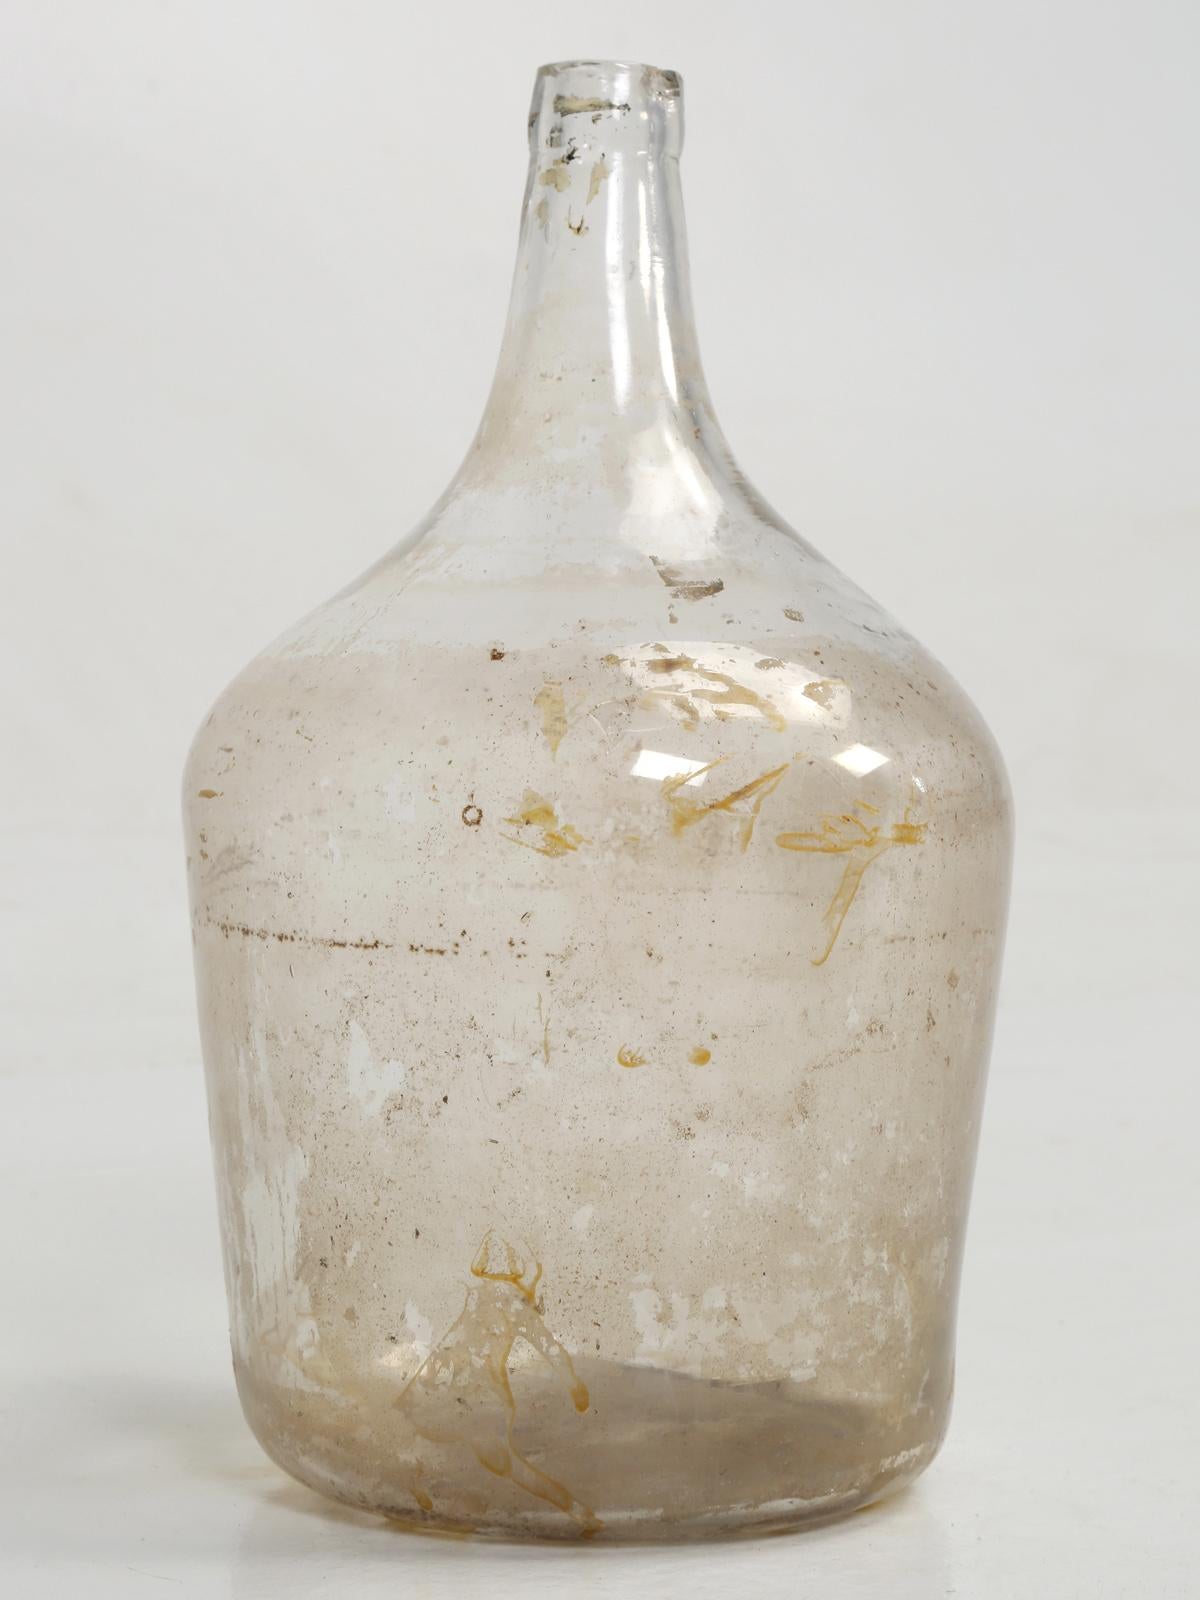  Carboy, demijohn or jimmyjohn, they all refer to glass containers. The name Carboy originated in Persia from the word; qarabah. Demijohn is French for; dame-jeanne, or Lady Jane  from the 1600's. Demijohns are any glass vessel, with a large body,